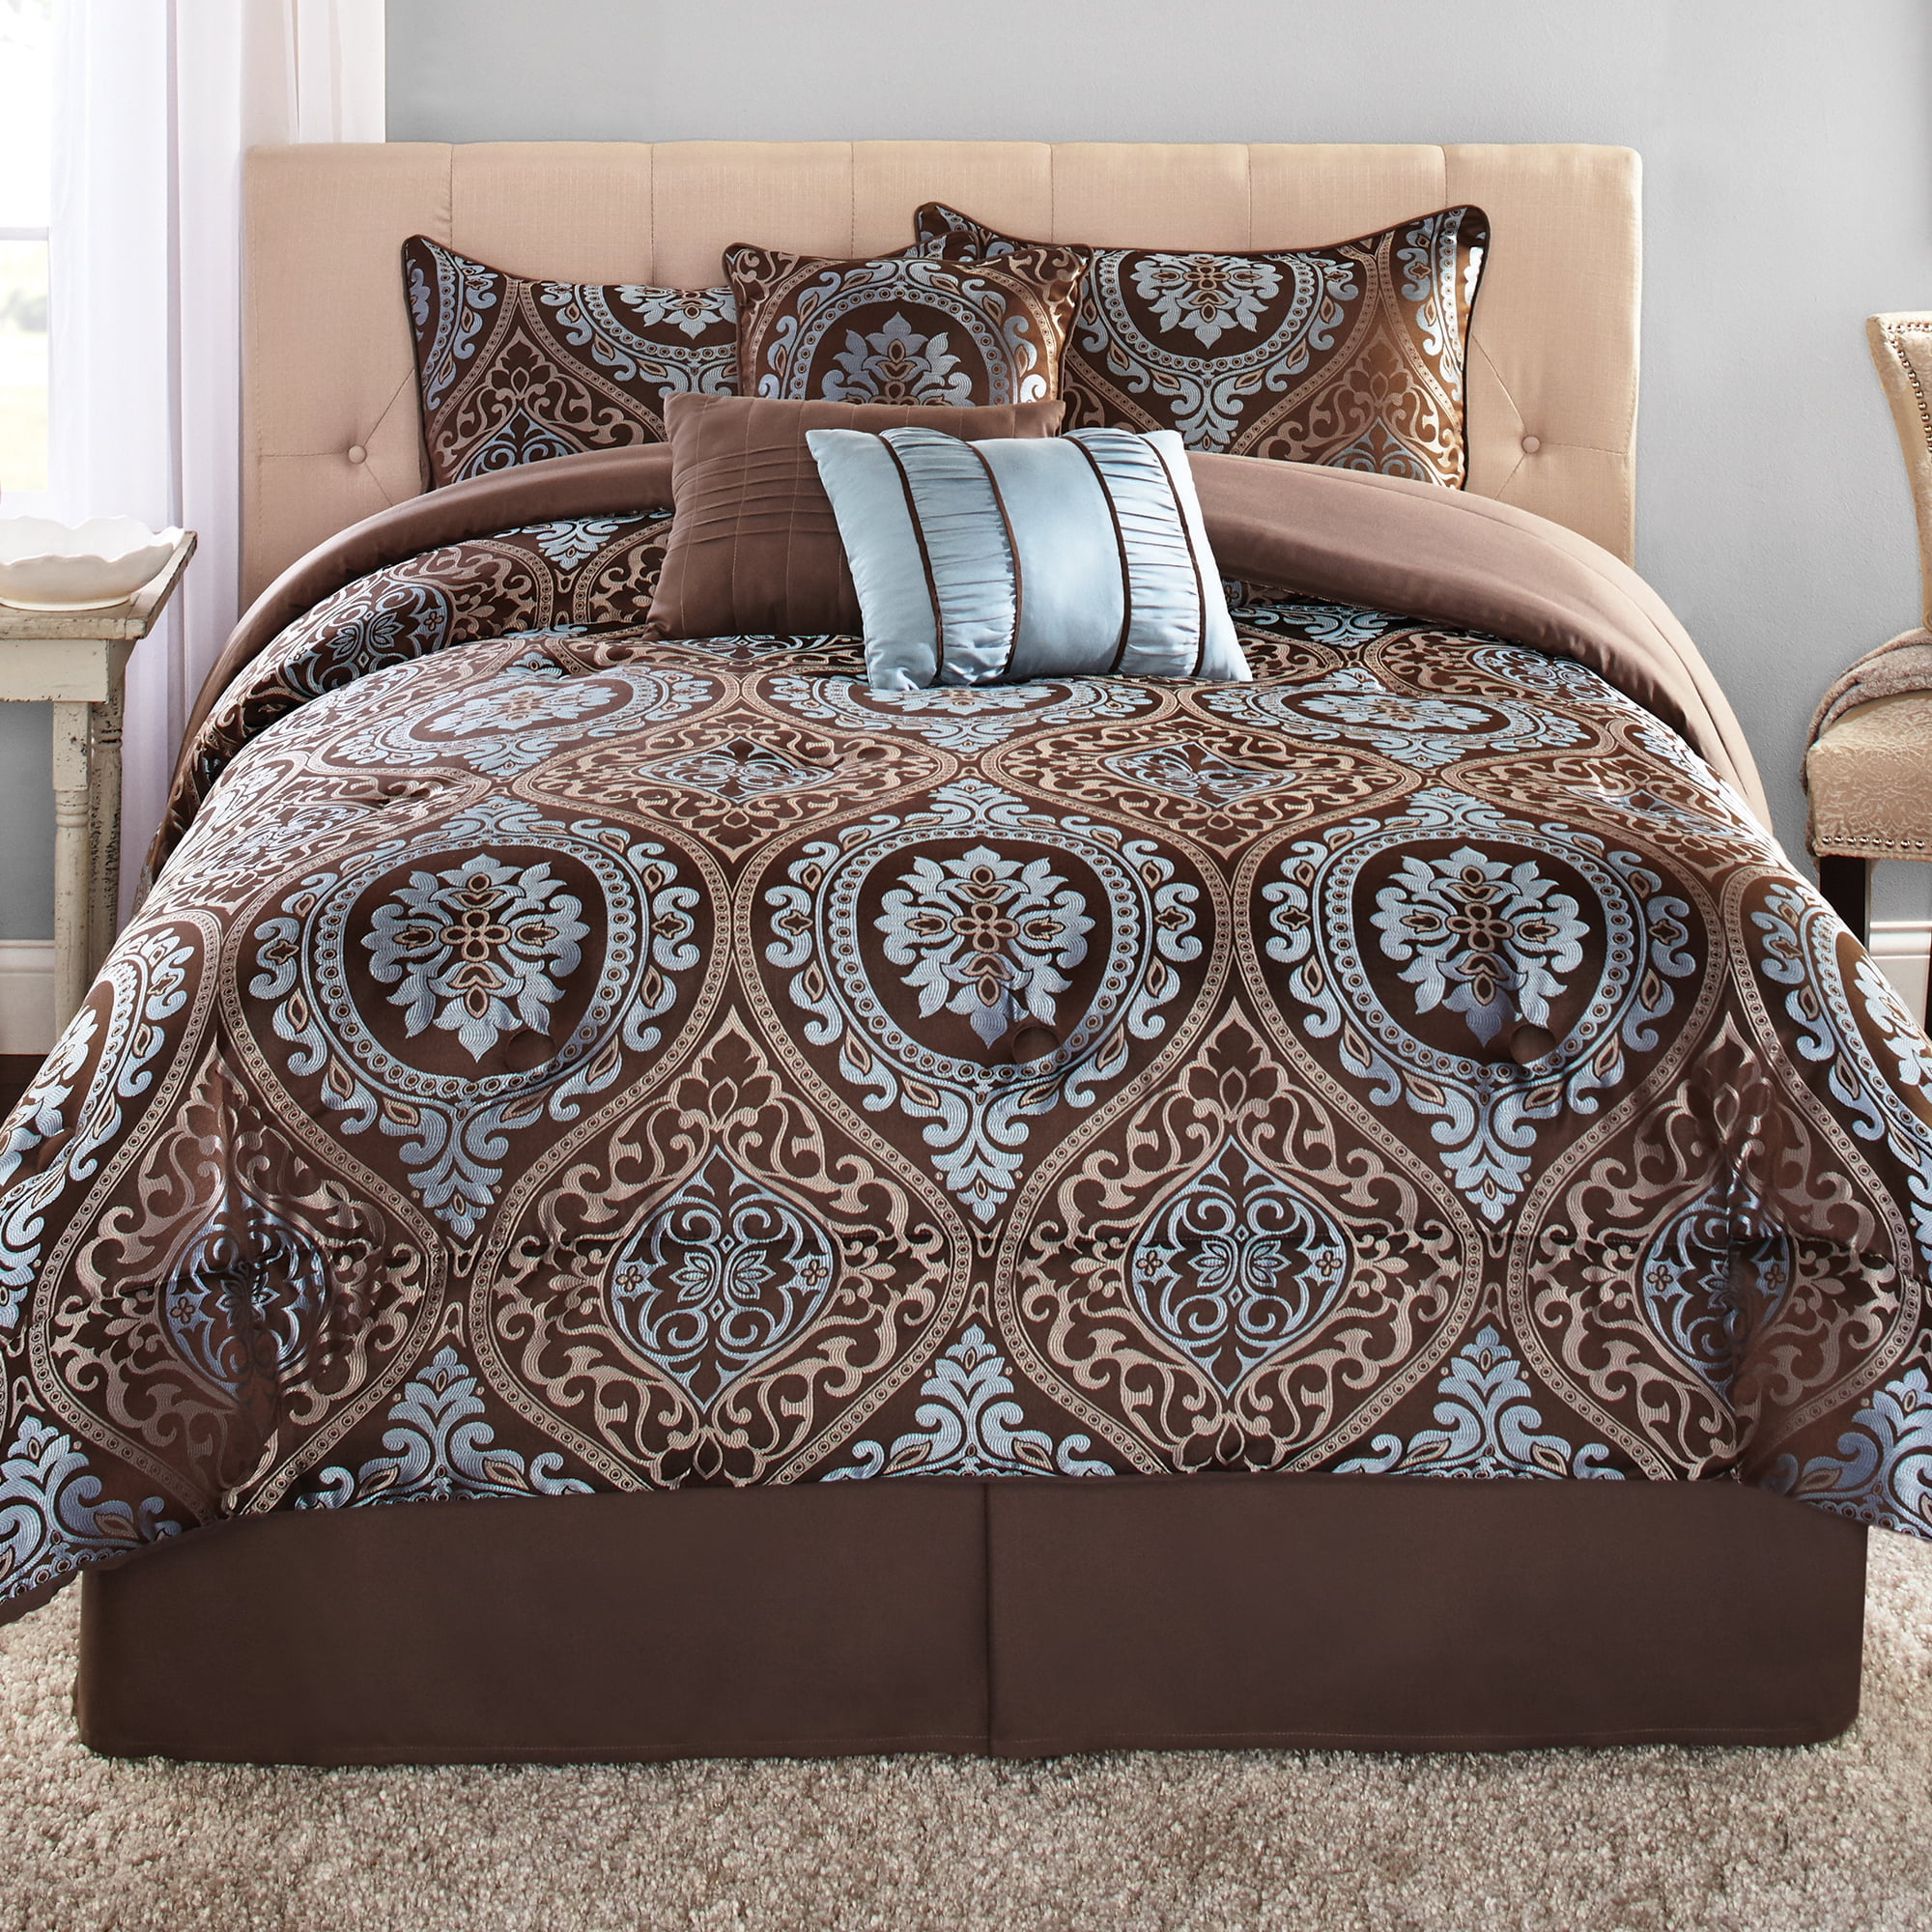 7 Piece Jacquard Bedspread Comforter Set with Matching Eyelet Curtains & Cushion